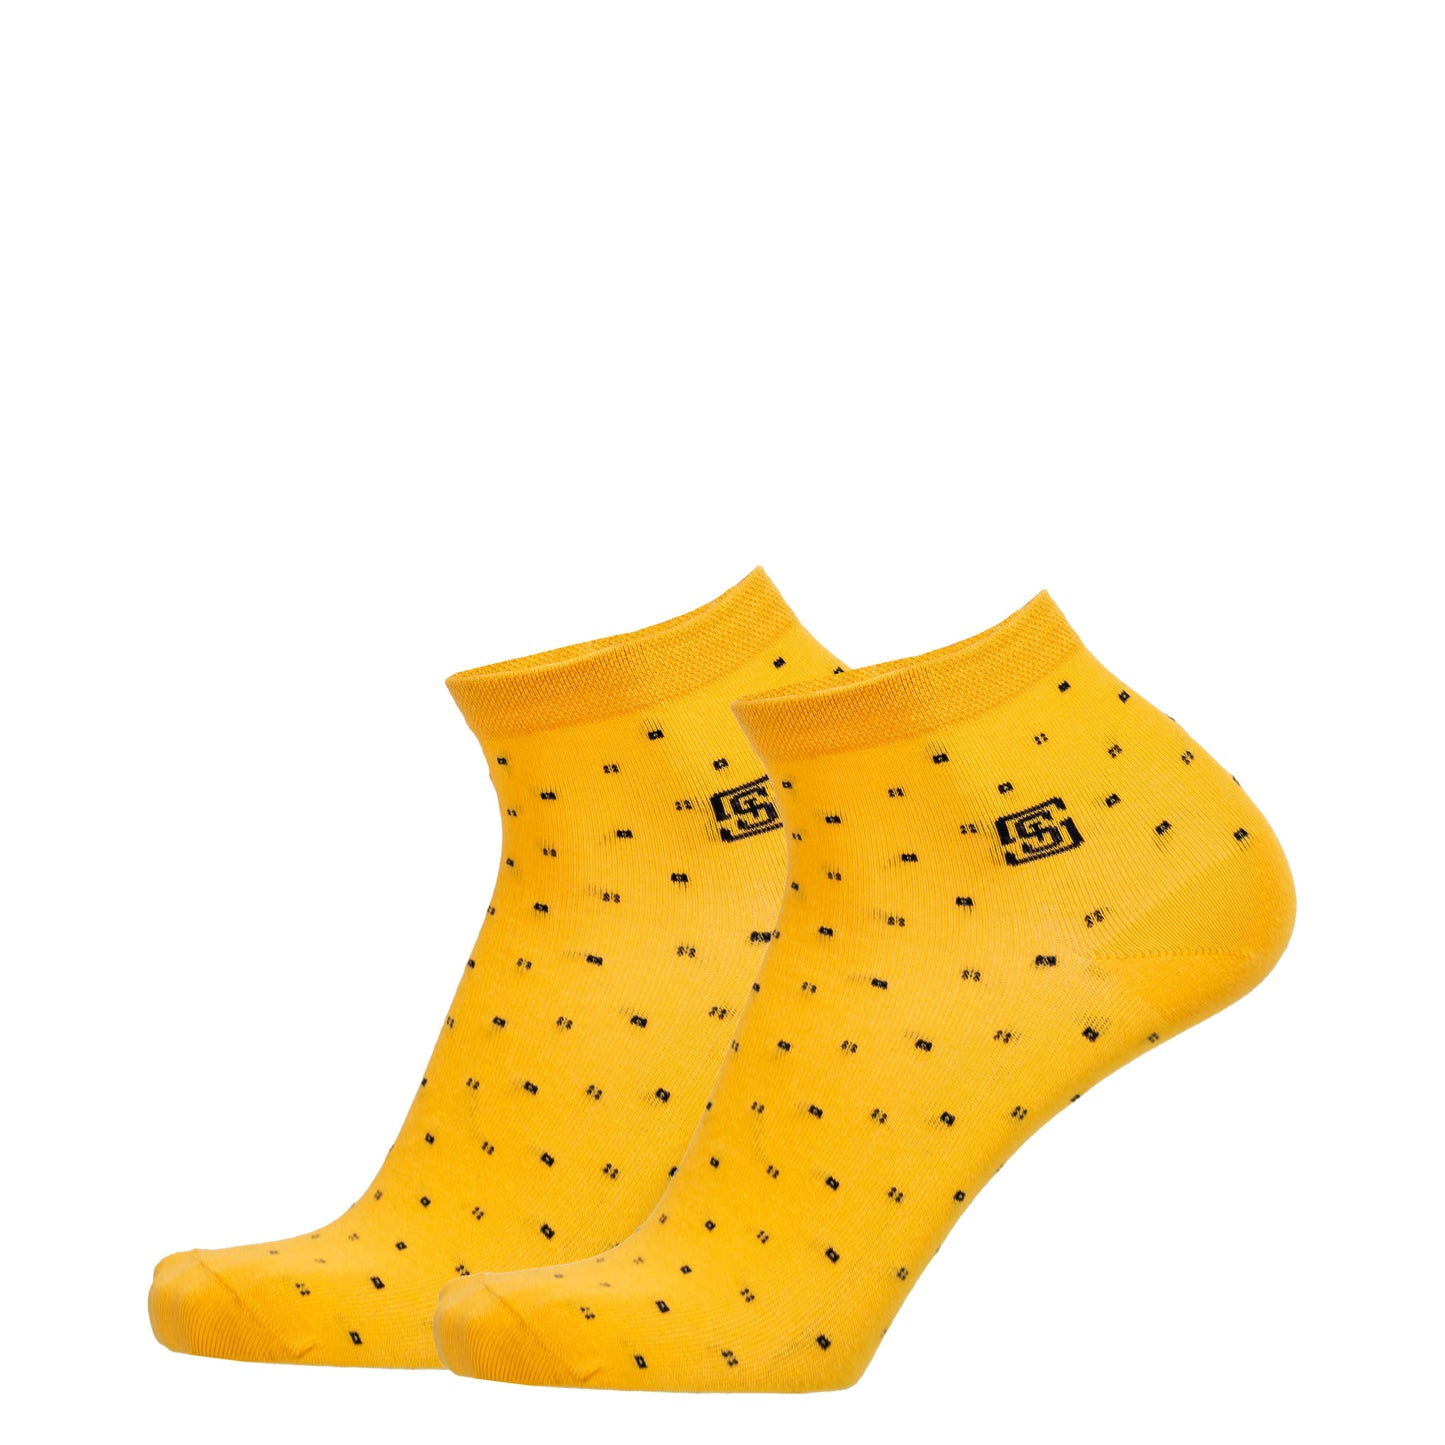 SPECTICALS CHARM YELLOW - ANKLE